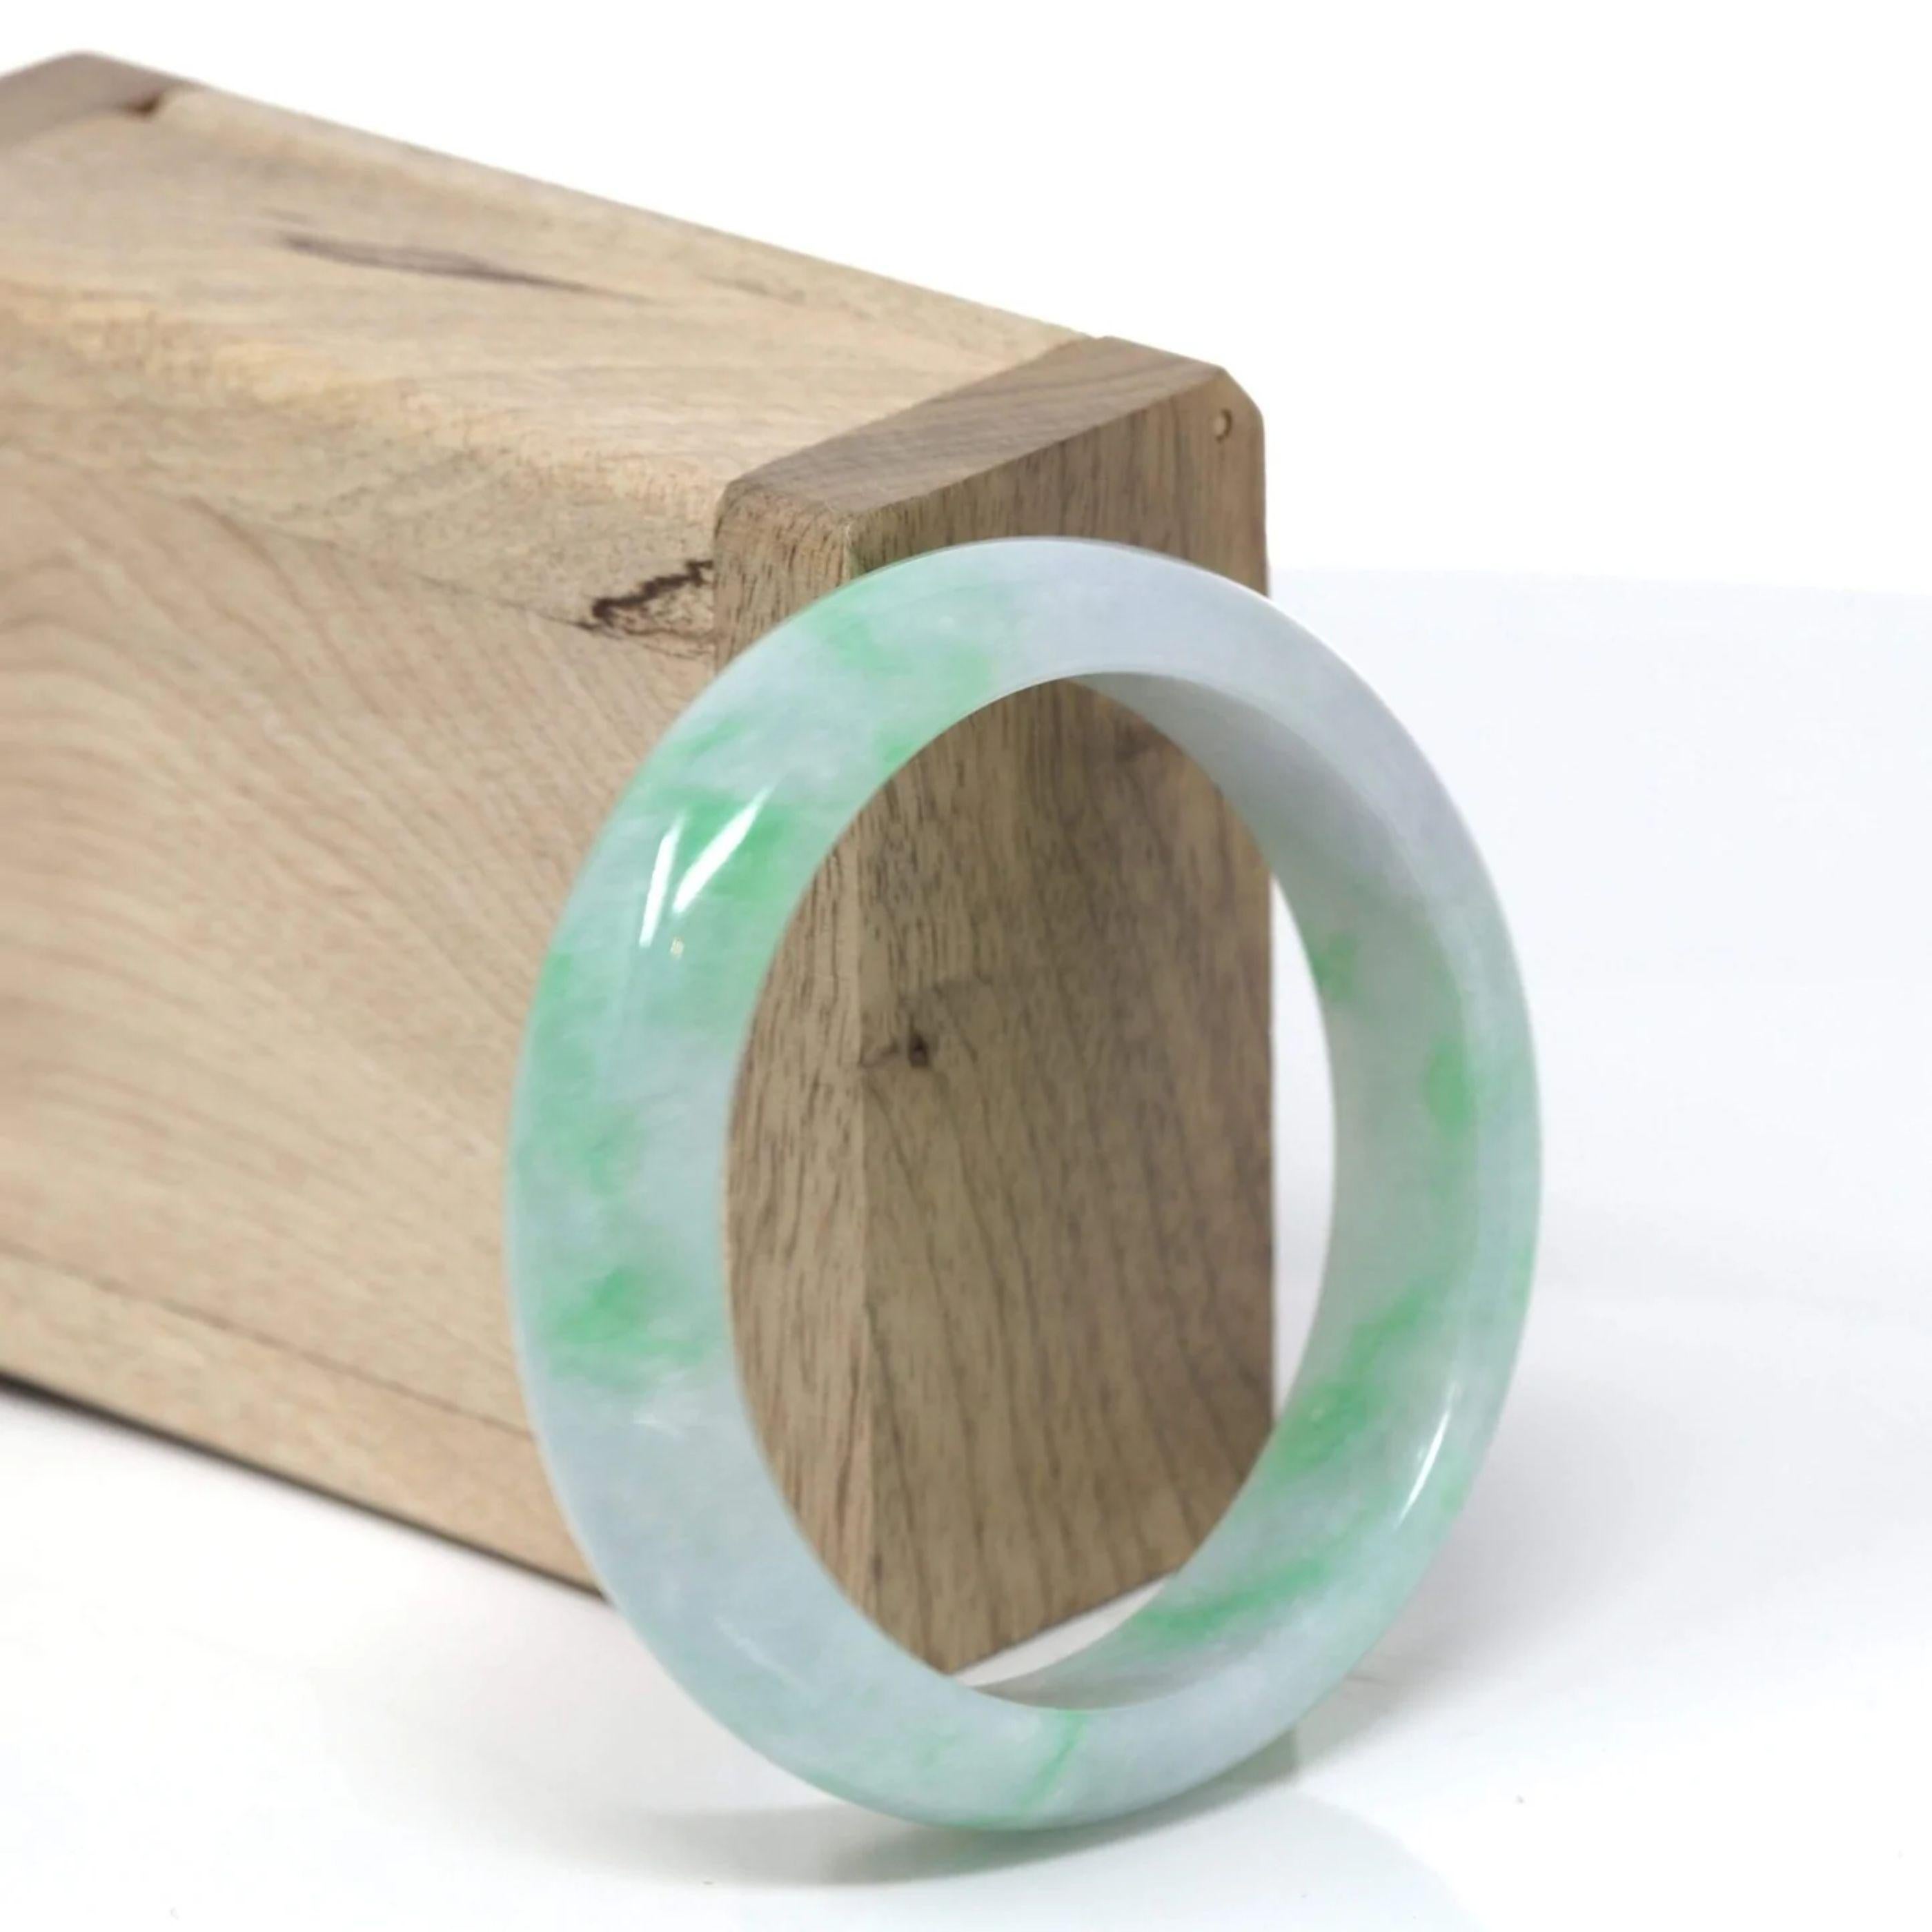 * DETAILS--- Genuine Burmese Jadeite Jade Bangle Bracelet. This bangle is made with high-quality genuine Burmese ice-green Jadeite jade, the jade texture is transparent with green & lavender colors inside. The green color and transparency lavender